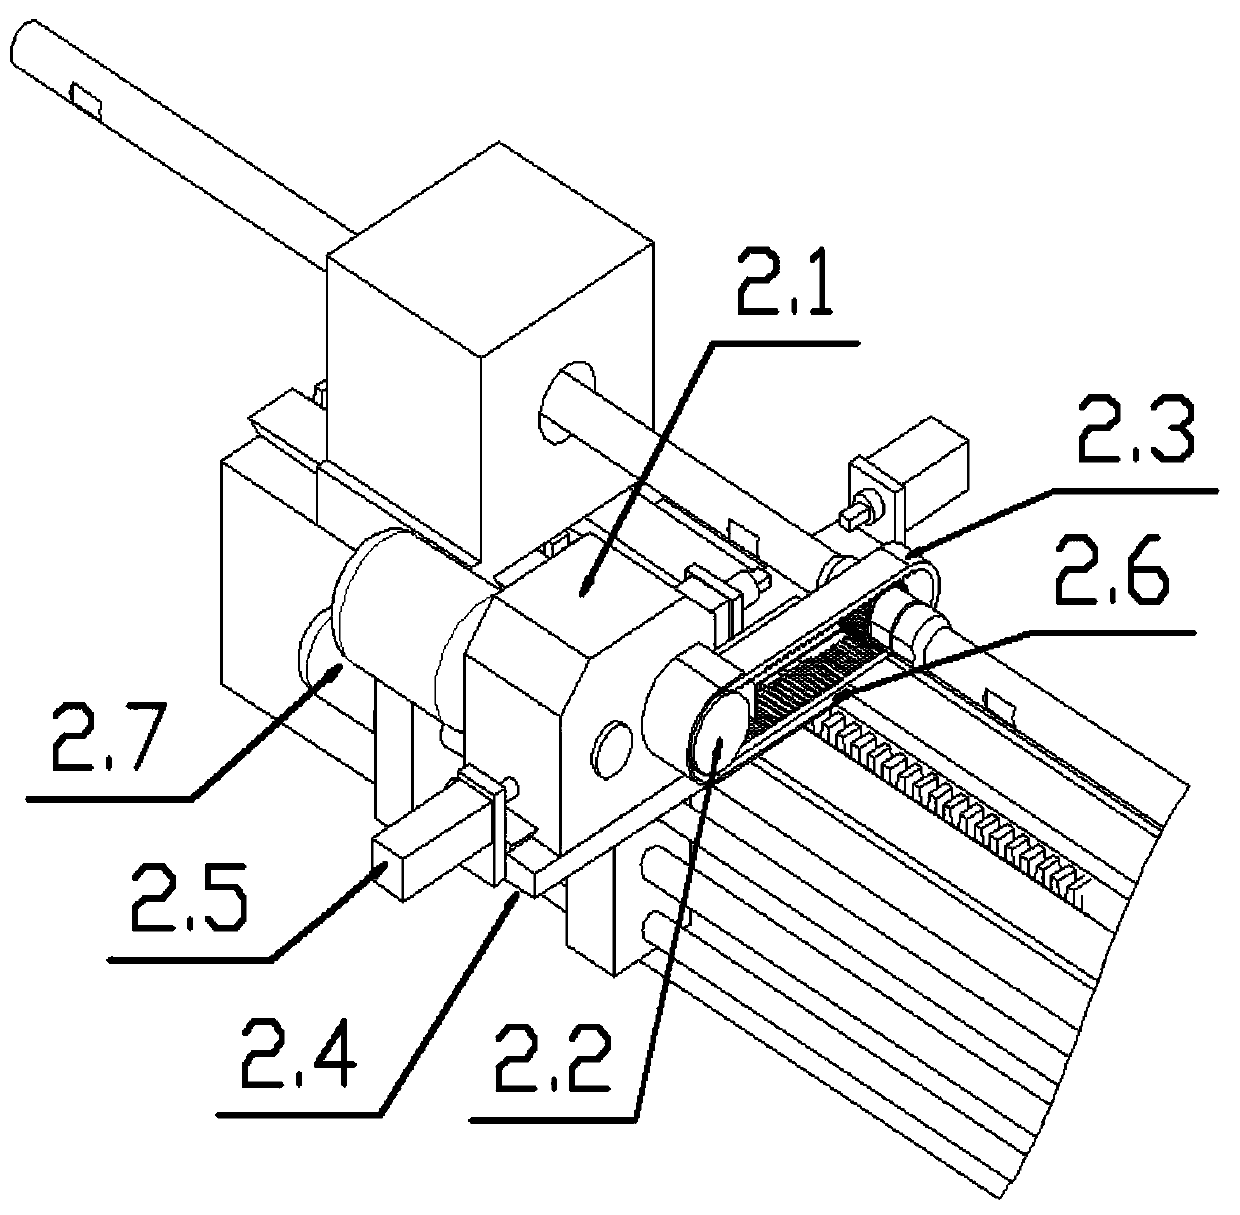 Multi-wedge-surface drill rod and drill rod automatic assembling and disassembling equipment applied to same